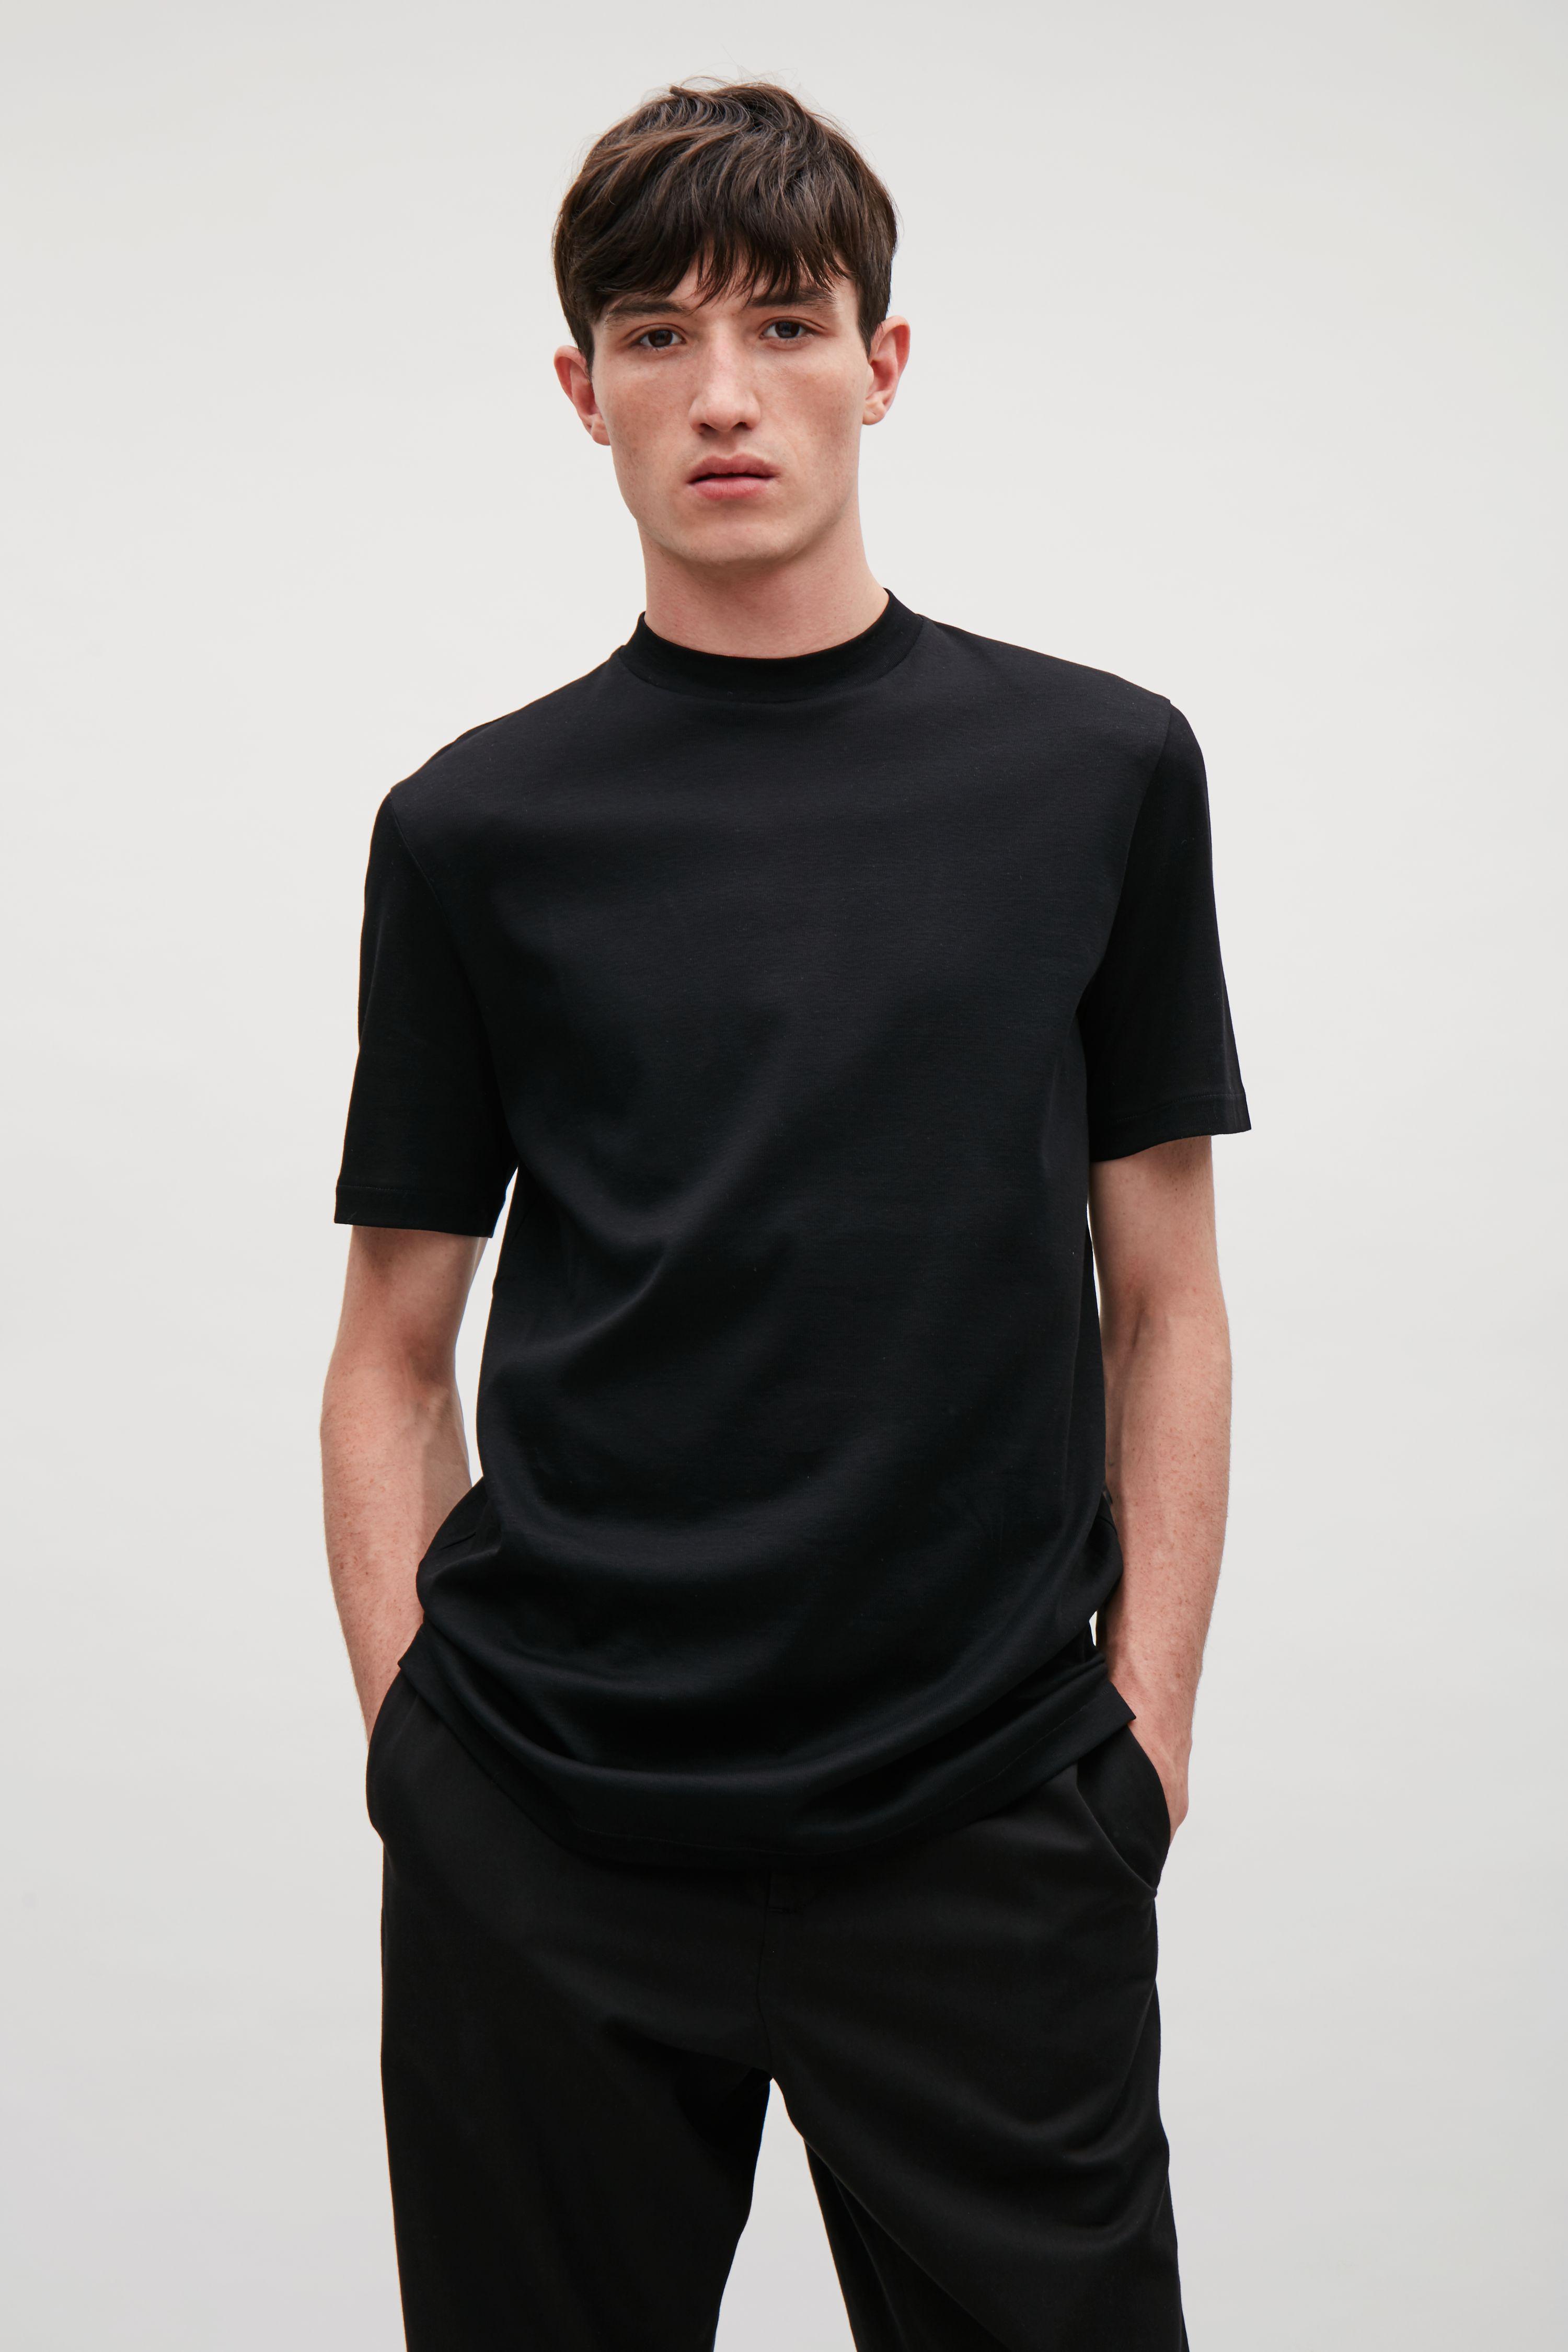 COS Cotton T-shirt With Raised Neck in Black for Men - Lyst